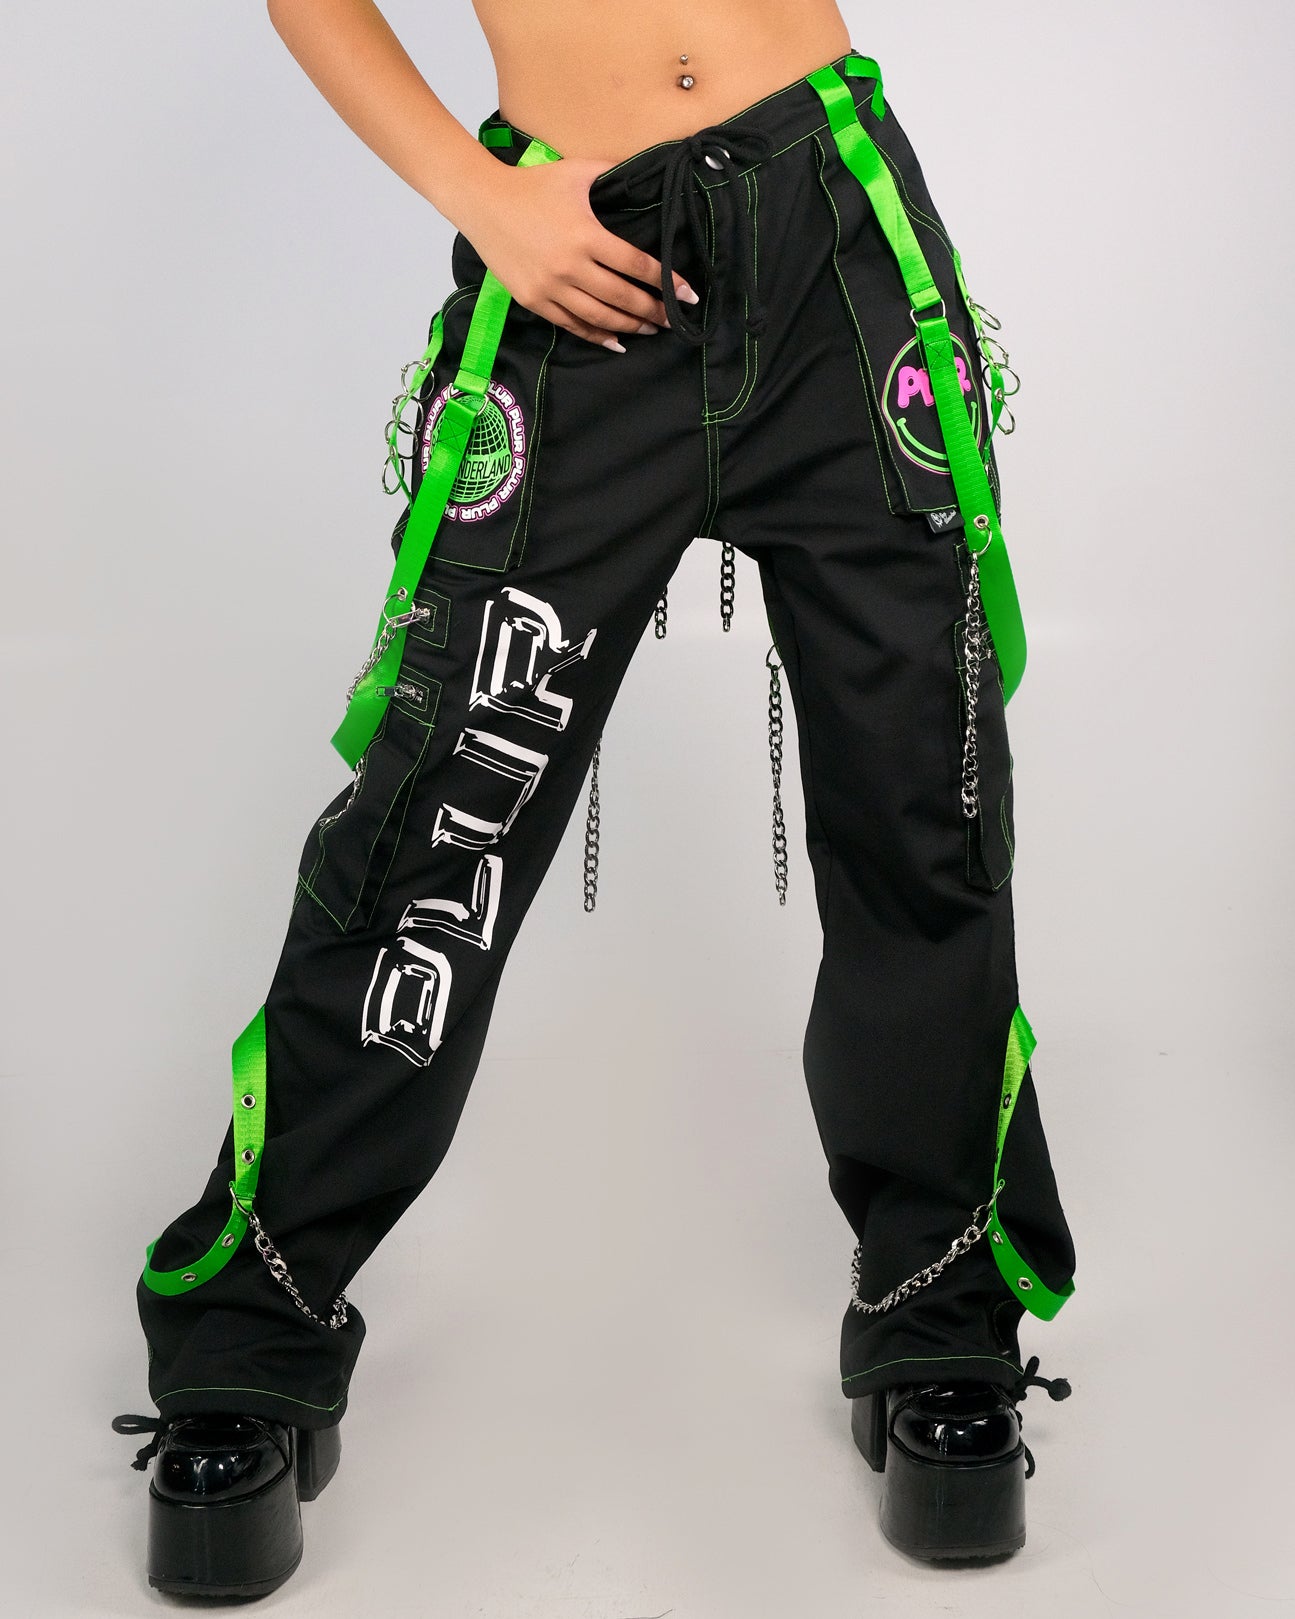 Mens Trousers by Cyberdog  Rave club  festival clothing